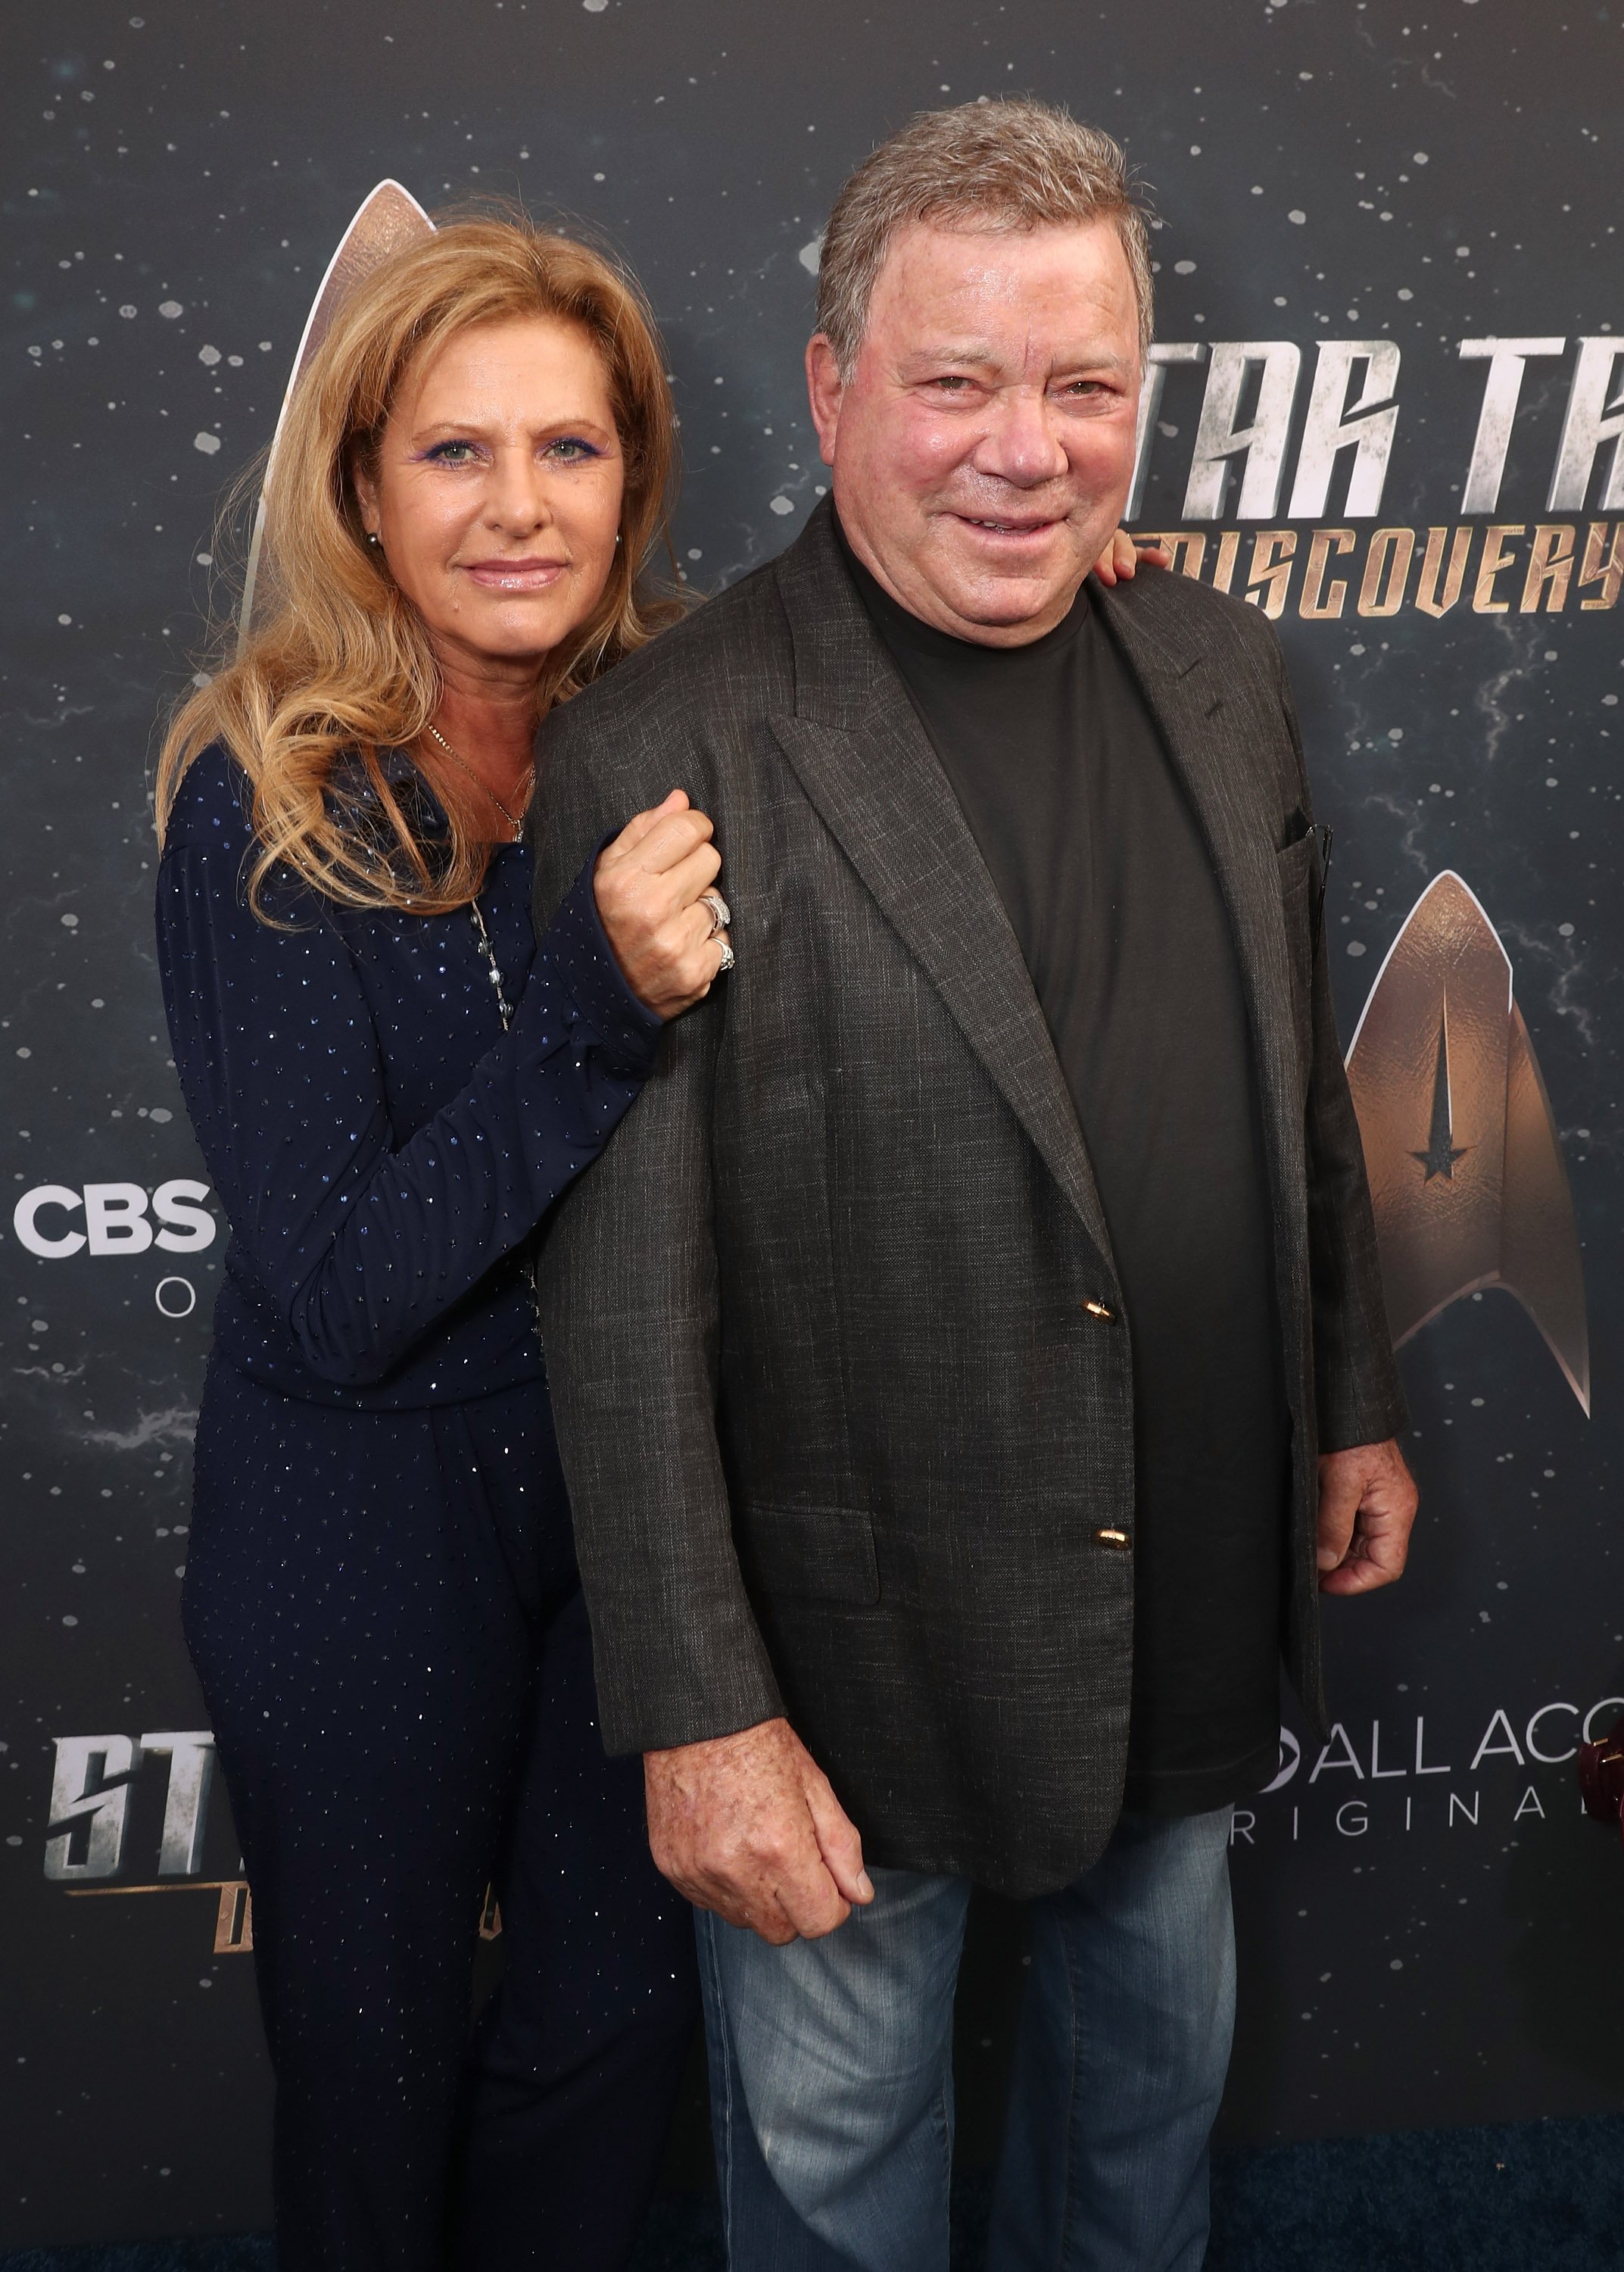 William Shatner and Elizabeth Anderson Martin at the premier of CBS’s “Star Trek: Discovery” in California on September 19, 2017 | Source: Getty Images